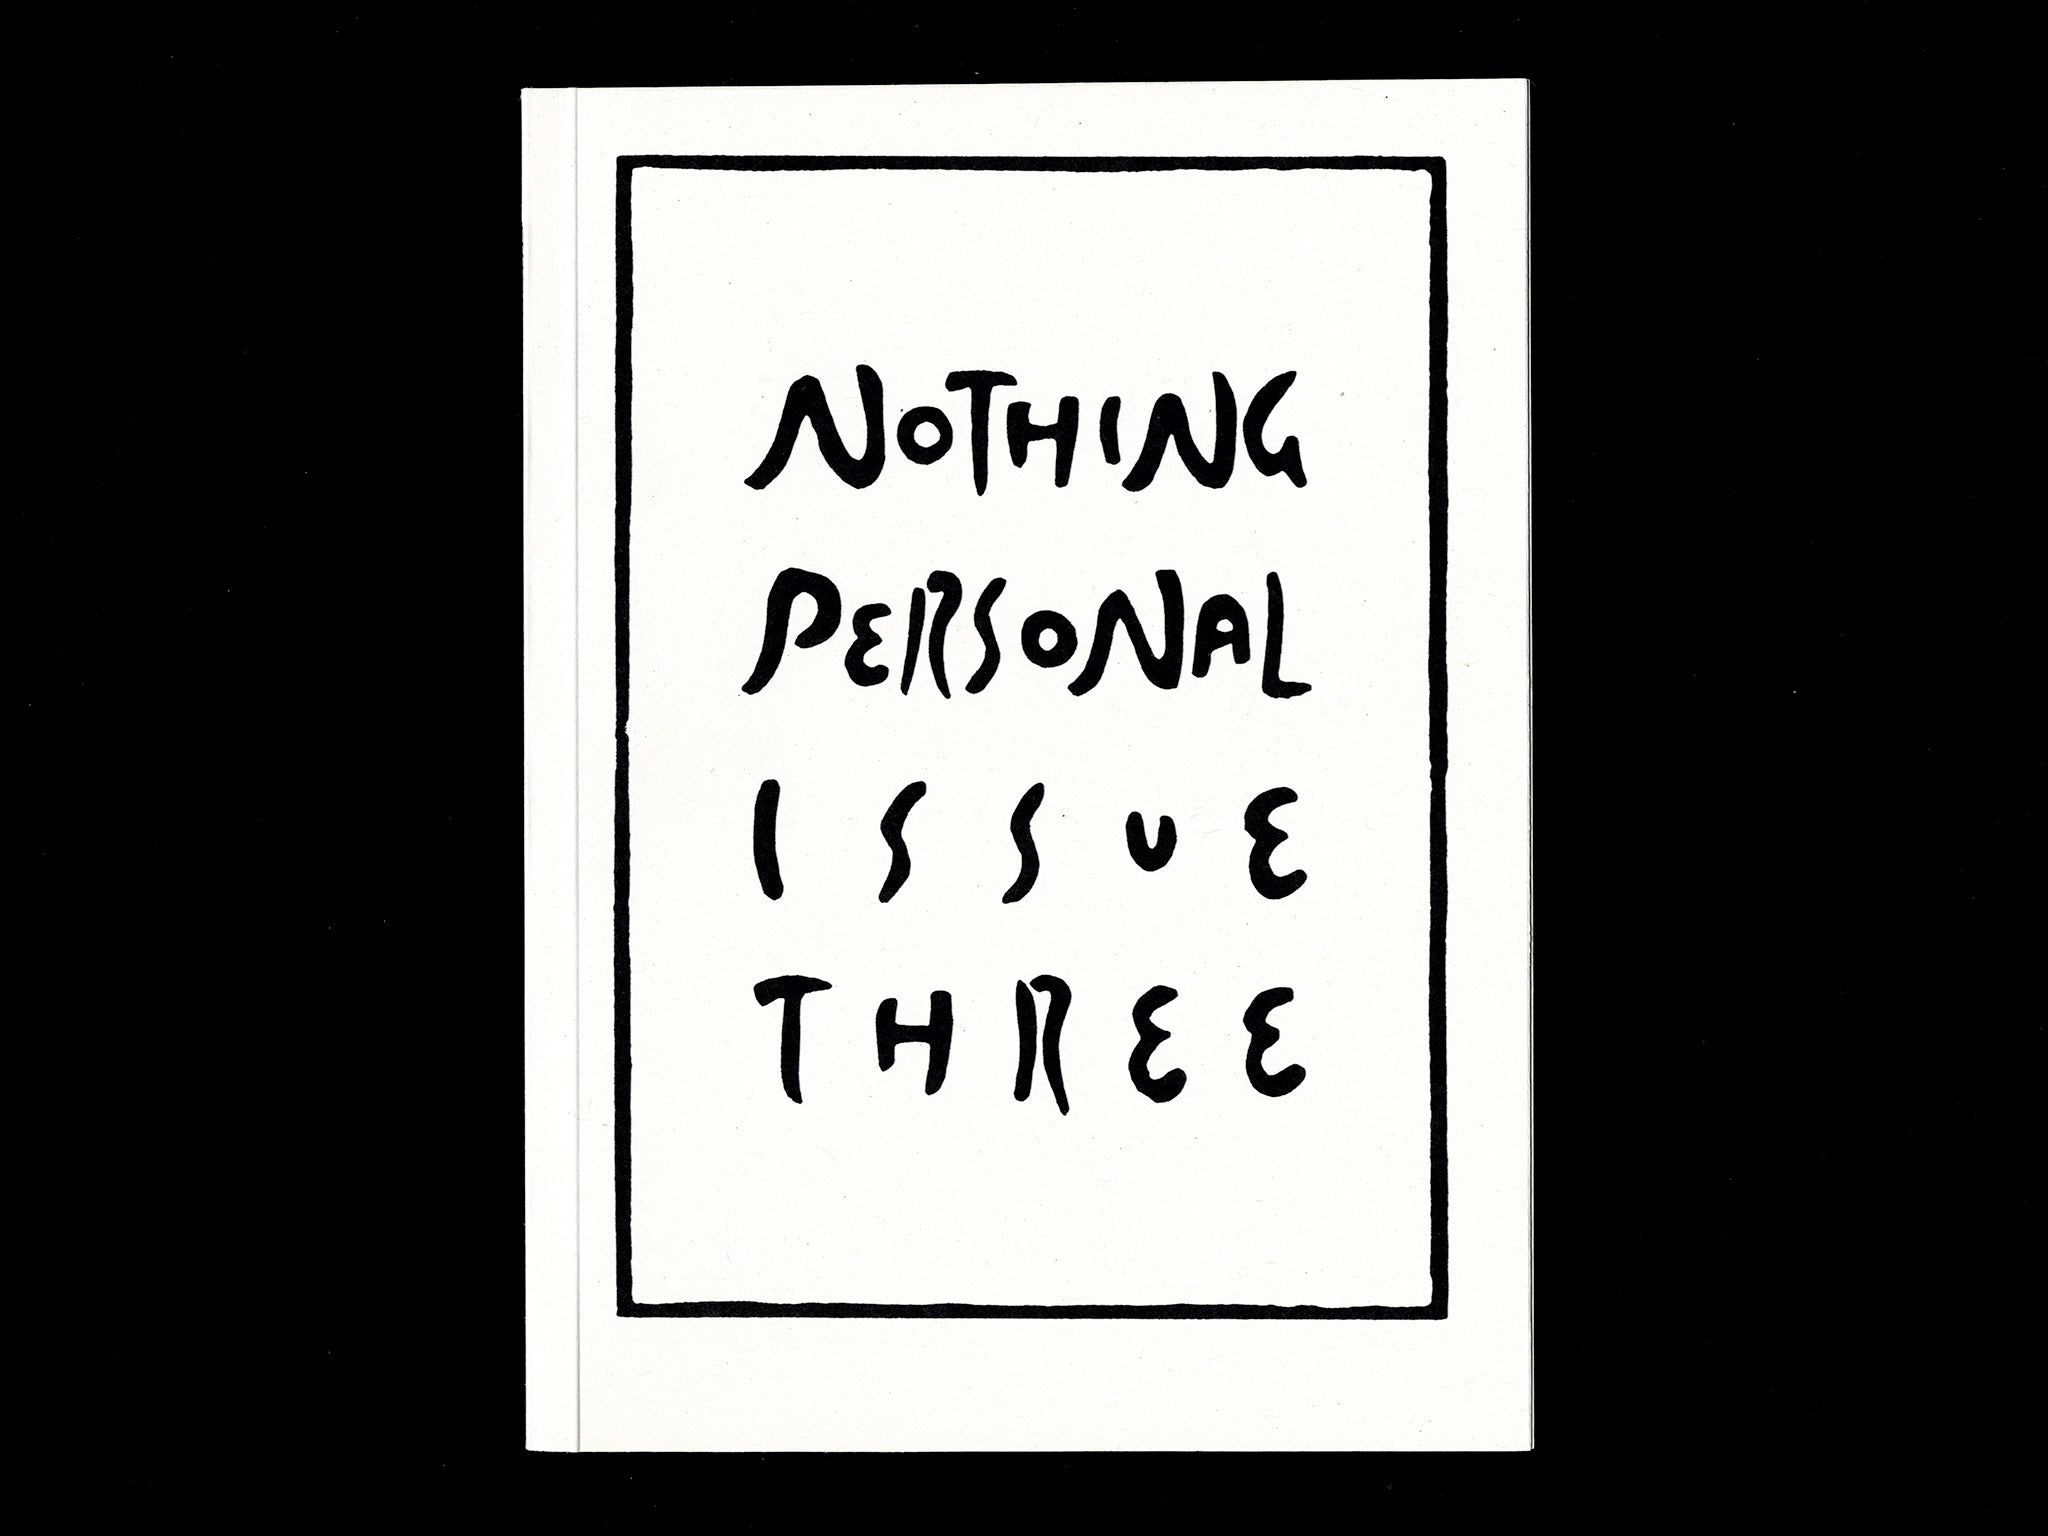 NOTHING PERSONAL: ISSUE THREE